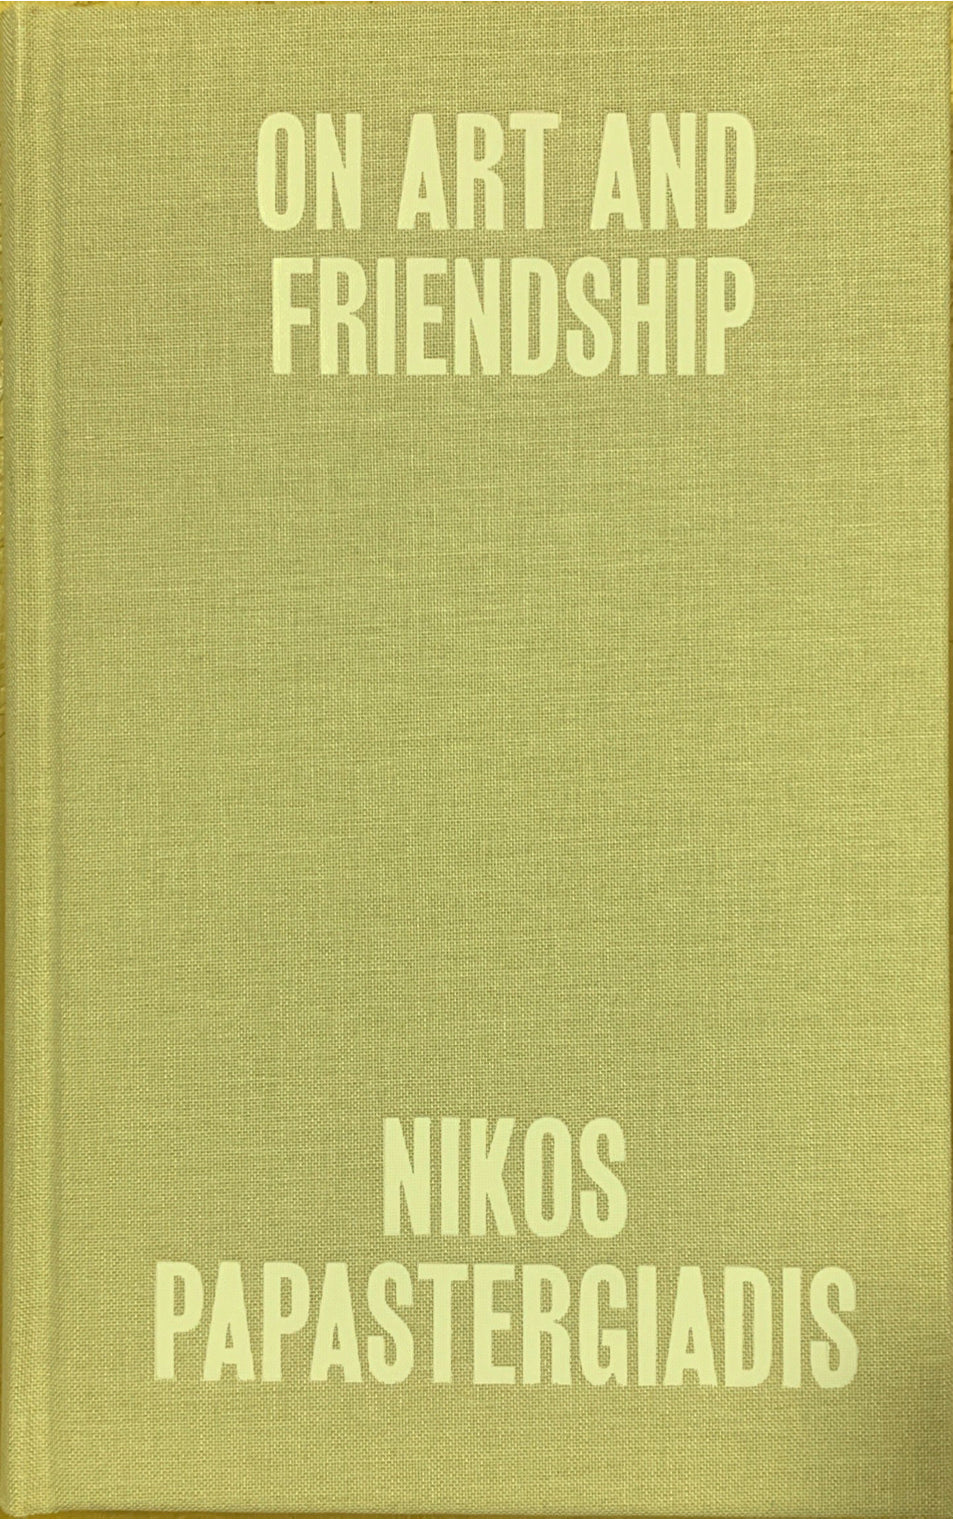 On Art and Friendship